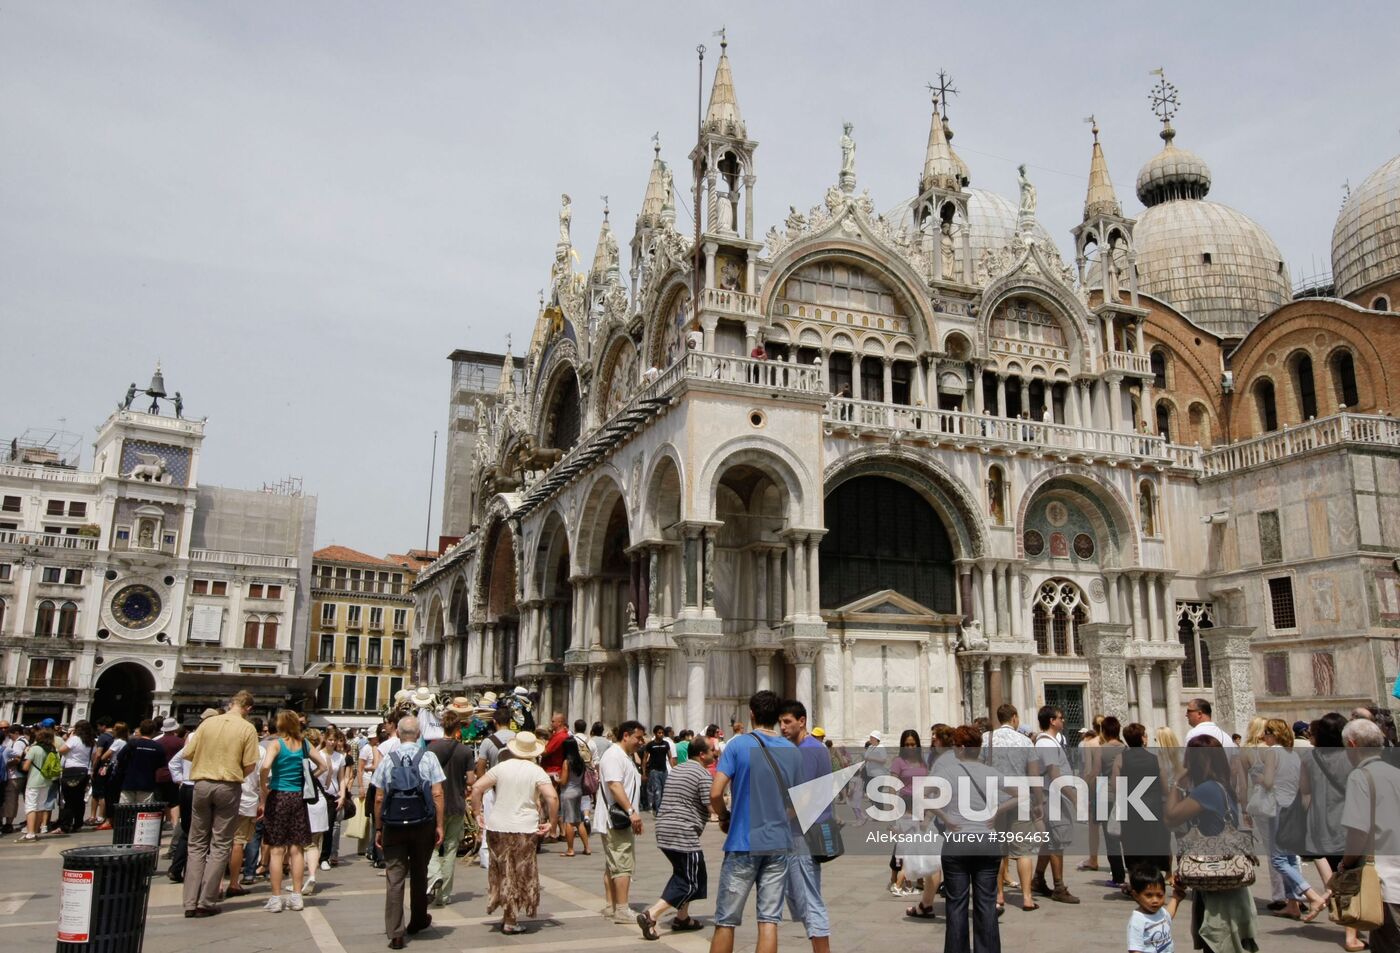 Venice sights and attractions